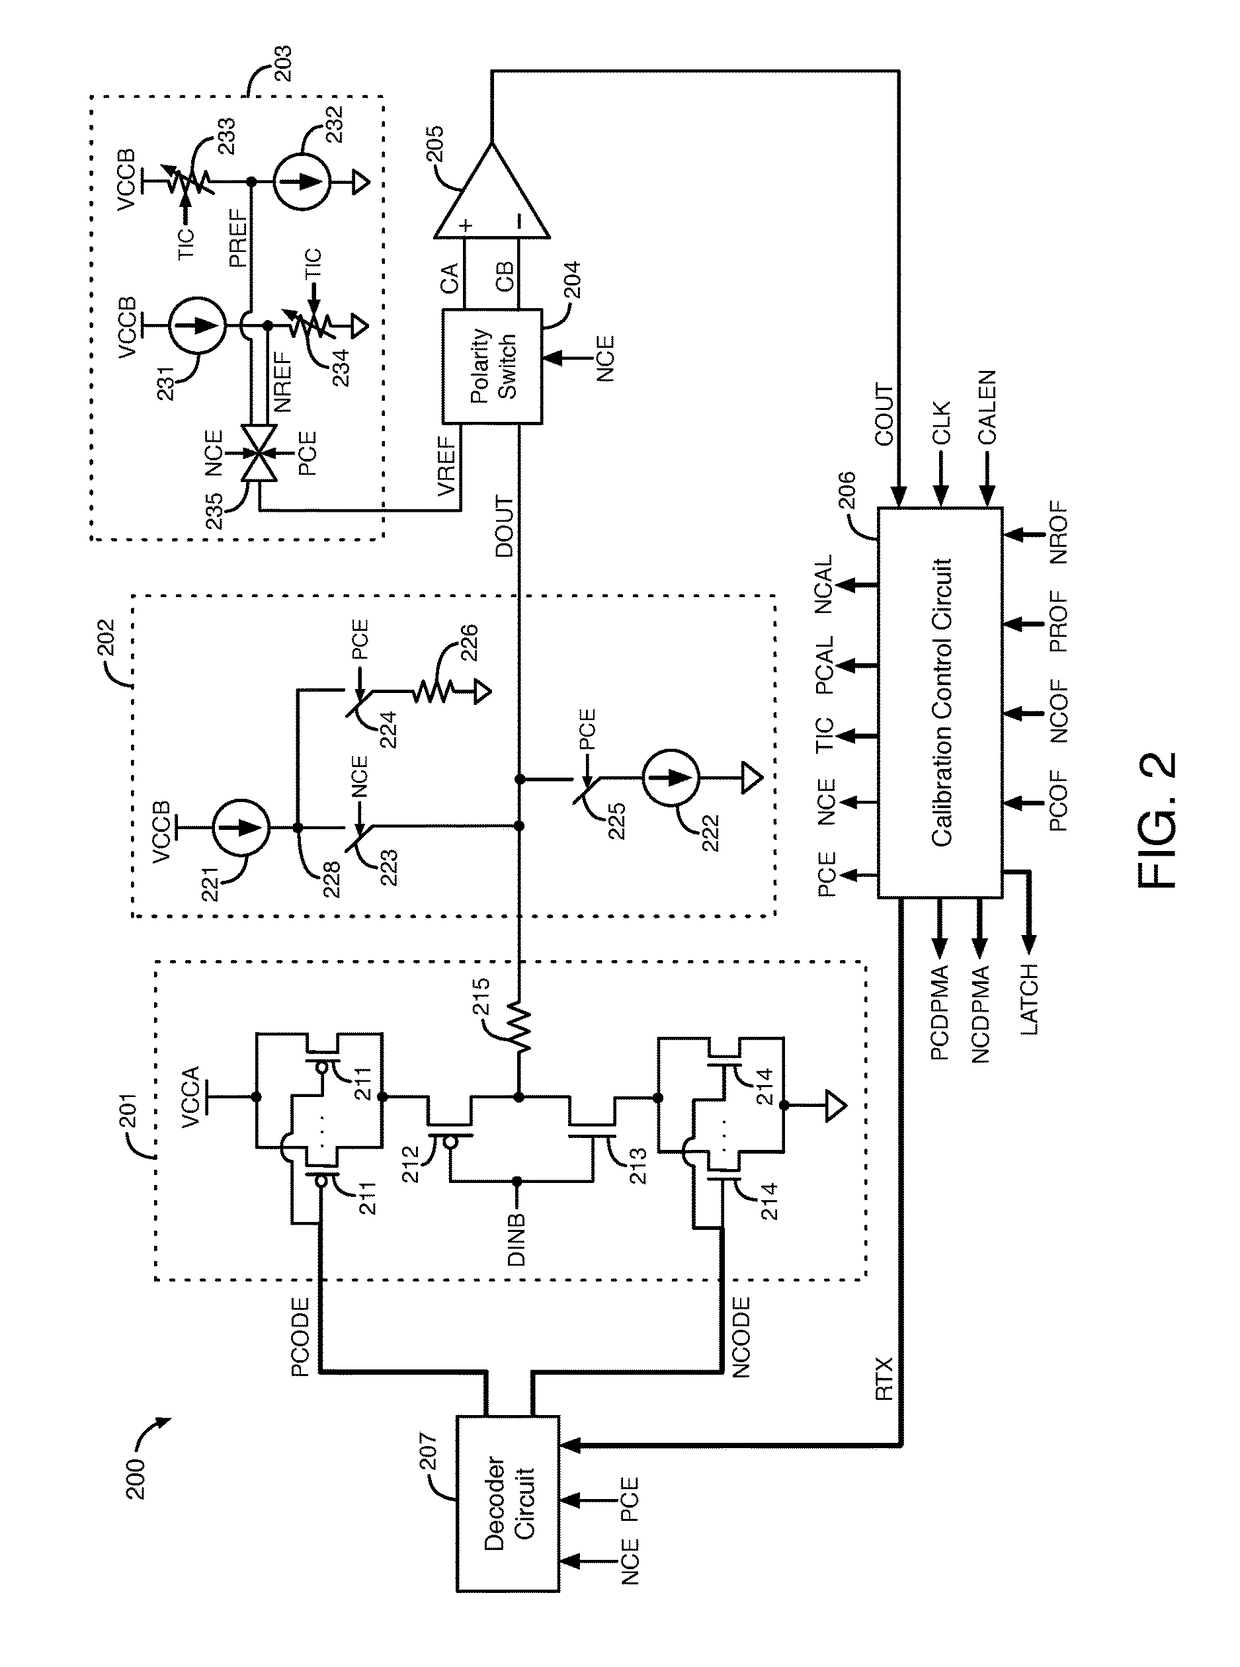 Circuits and methods for impedance calibration